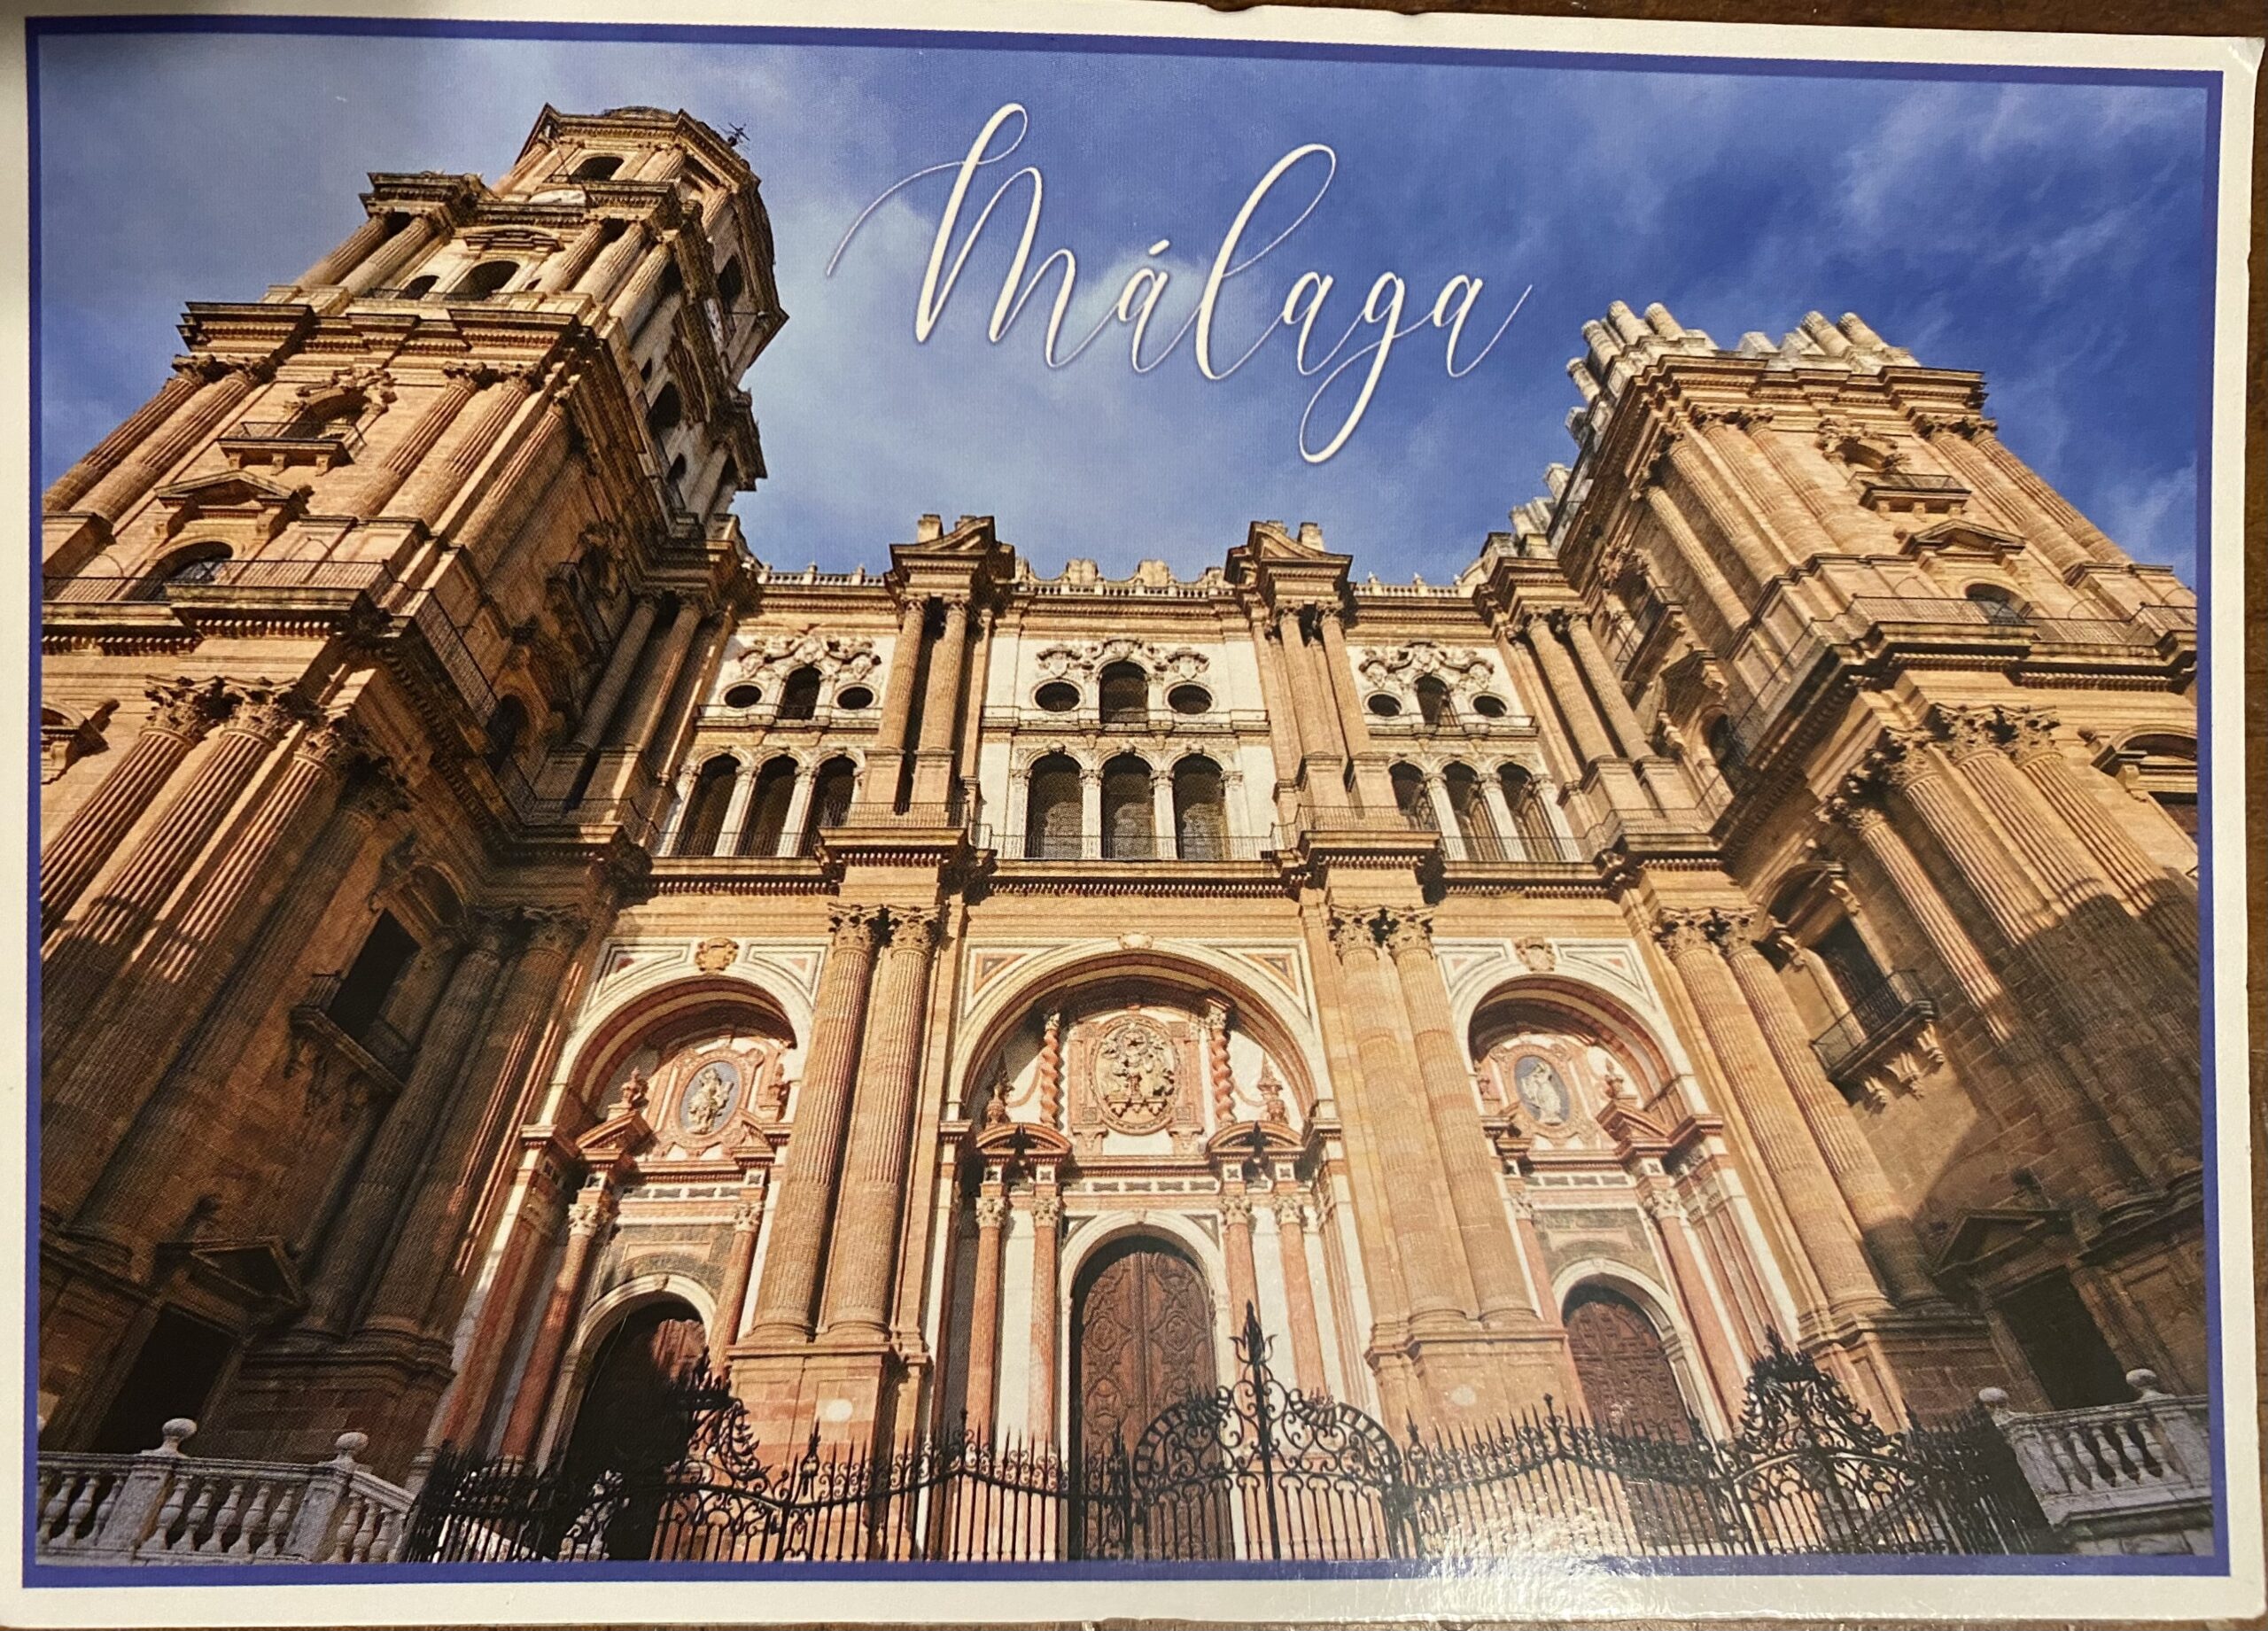 Postcard from Spain. Received Jan 26 2022